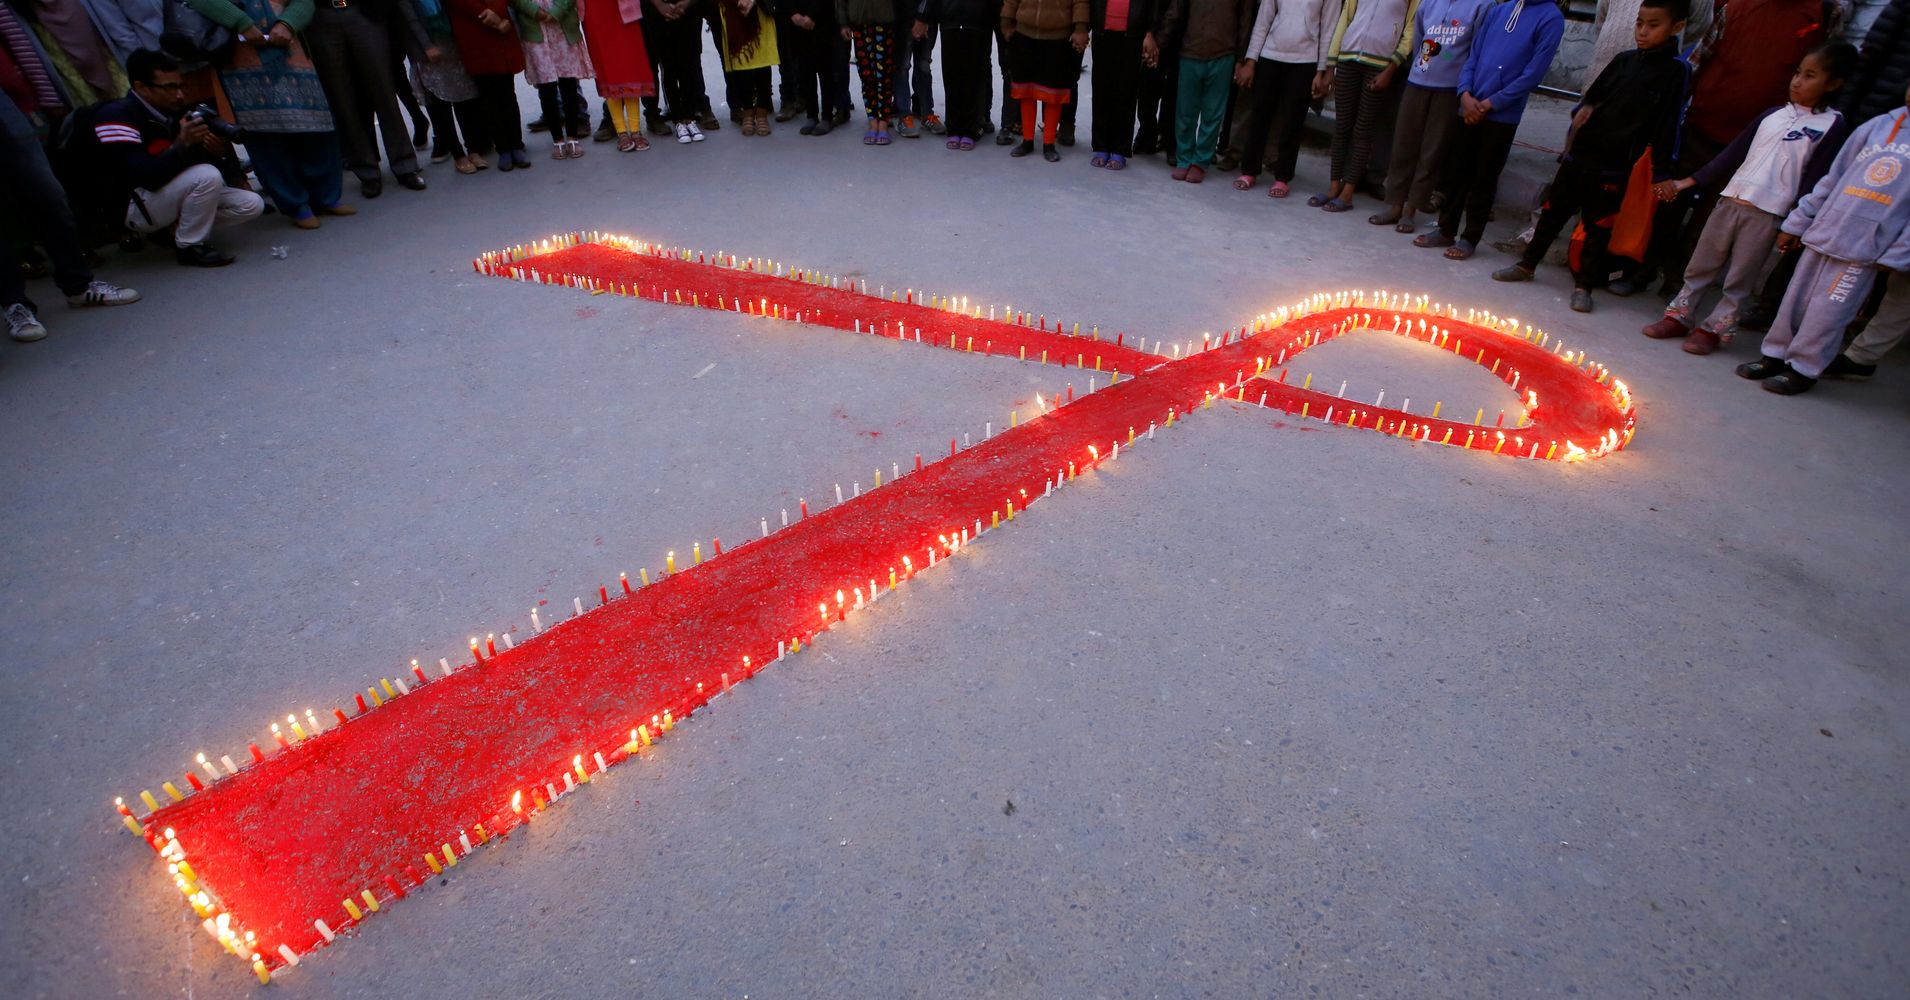 8 Common Misconceptions About HIV And AIDS HuffPost